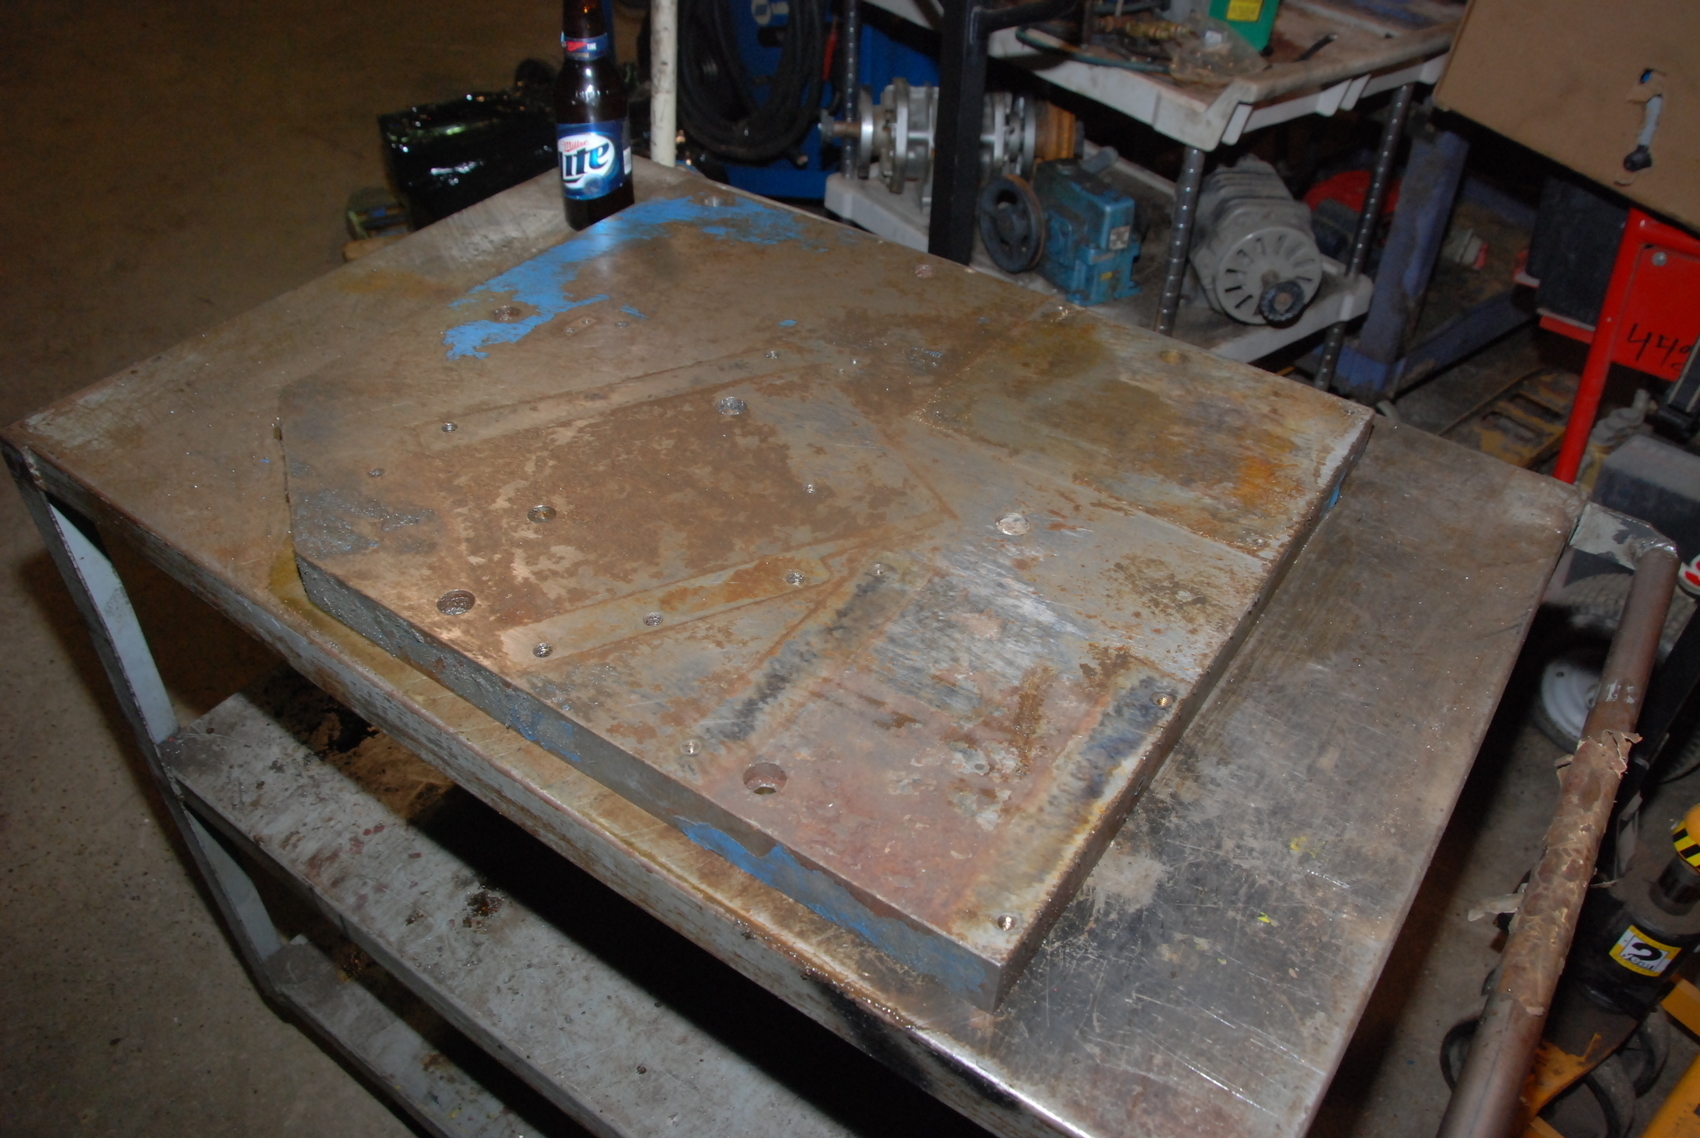 ONE steel Plate for blacksmith anvil,197 lbs;23-1/2x20-1/2x1 1/2"